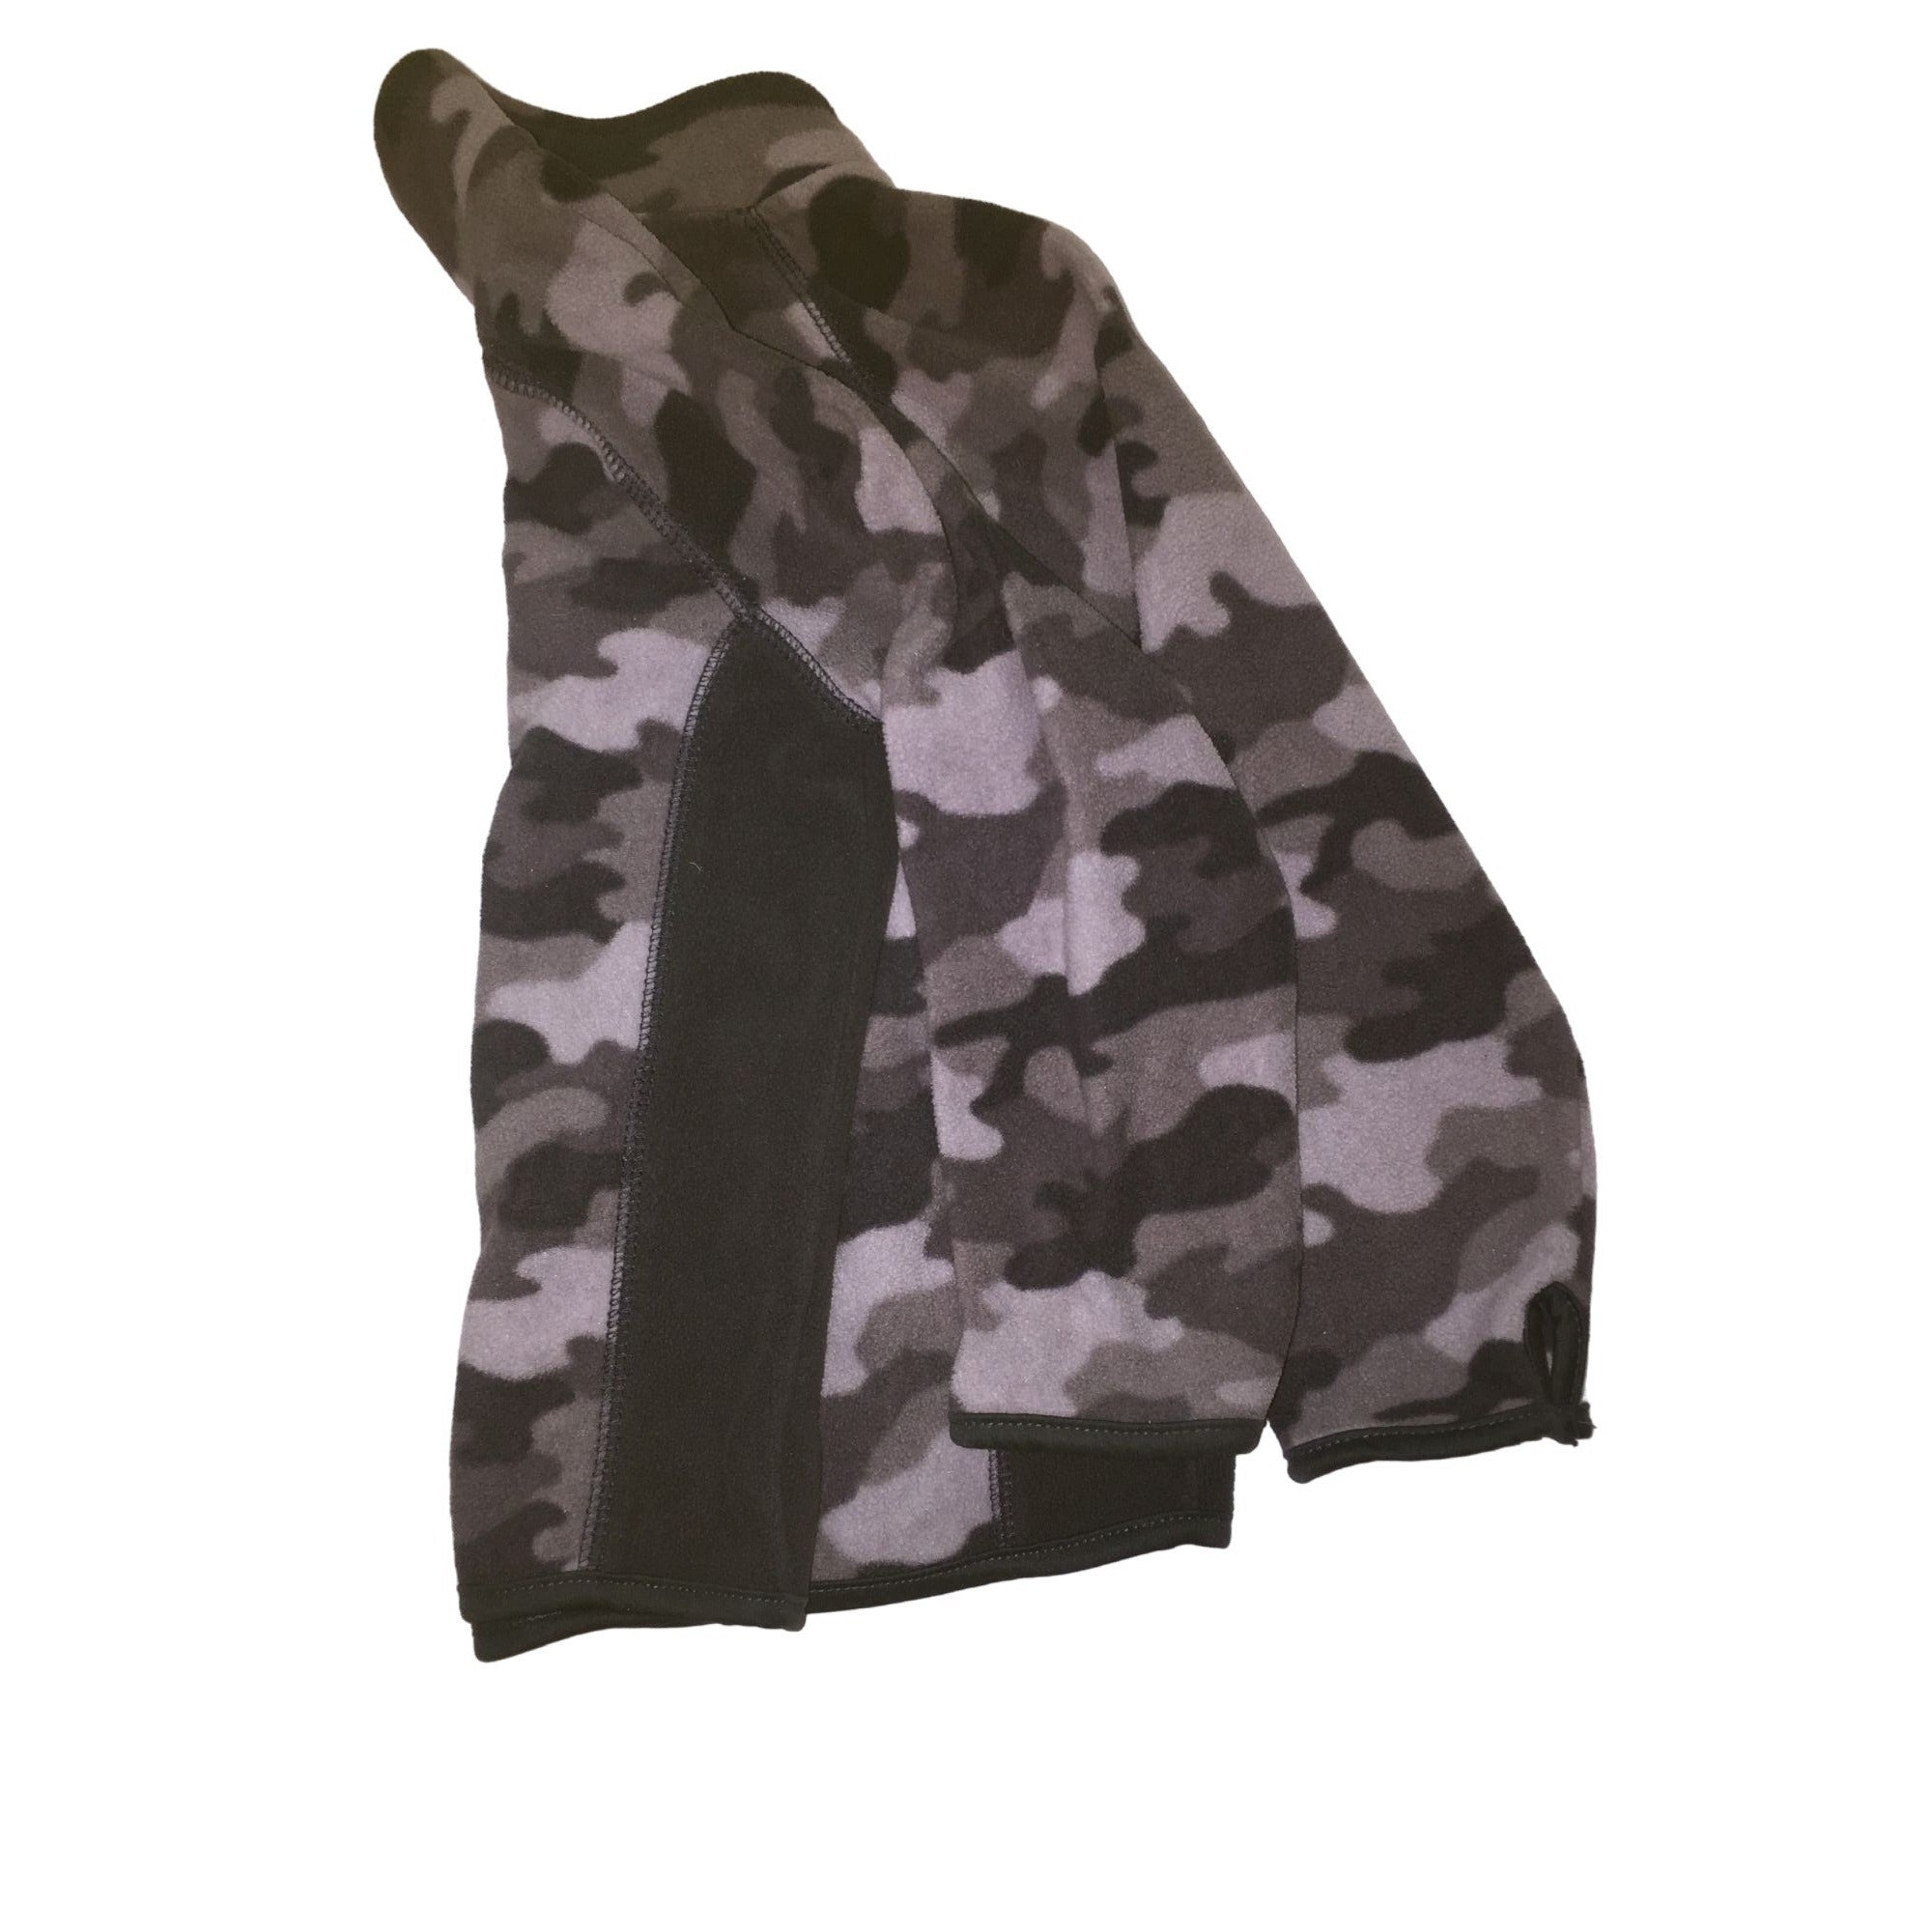 Boys Size 4t Jumping Beans Gray/Black Collared Camo Long Sleeved Jacket